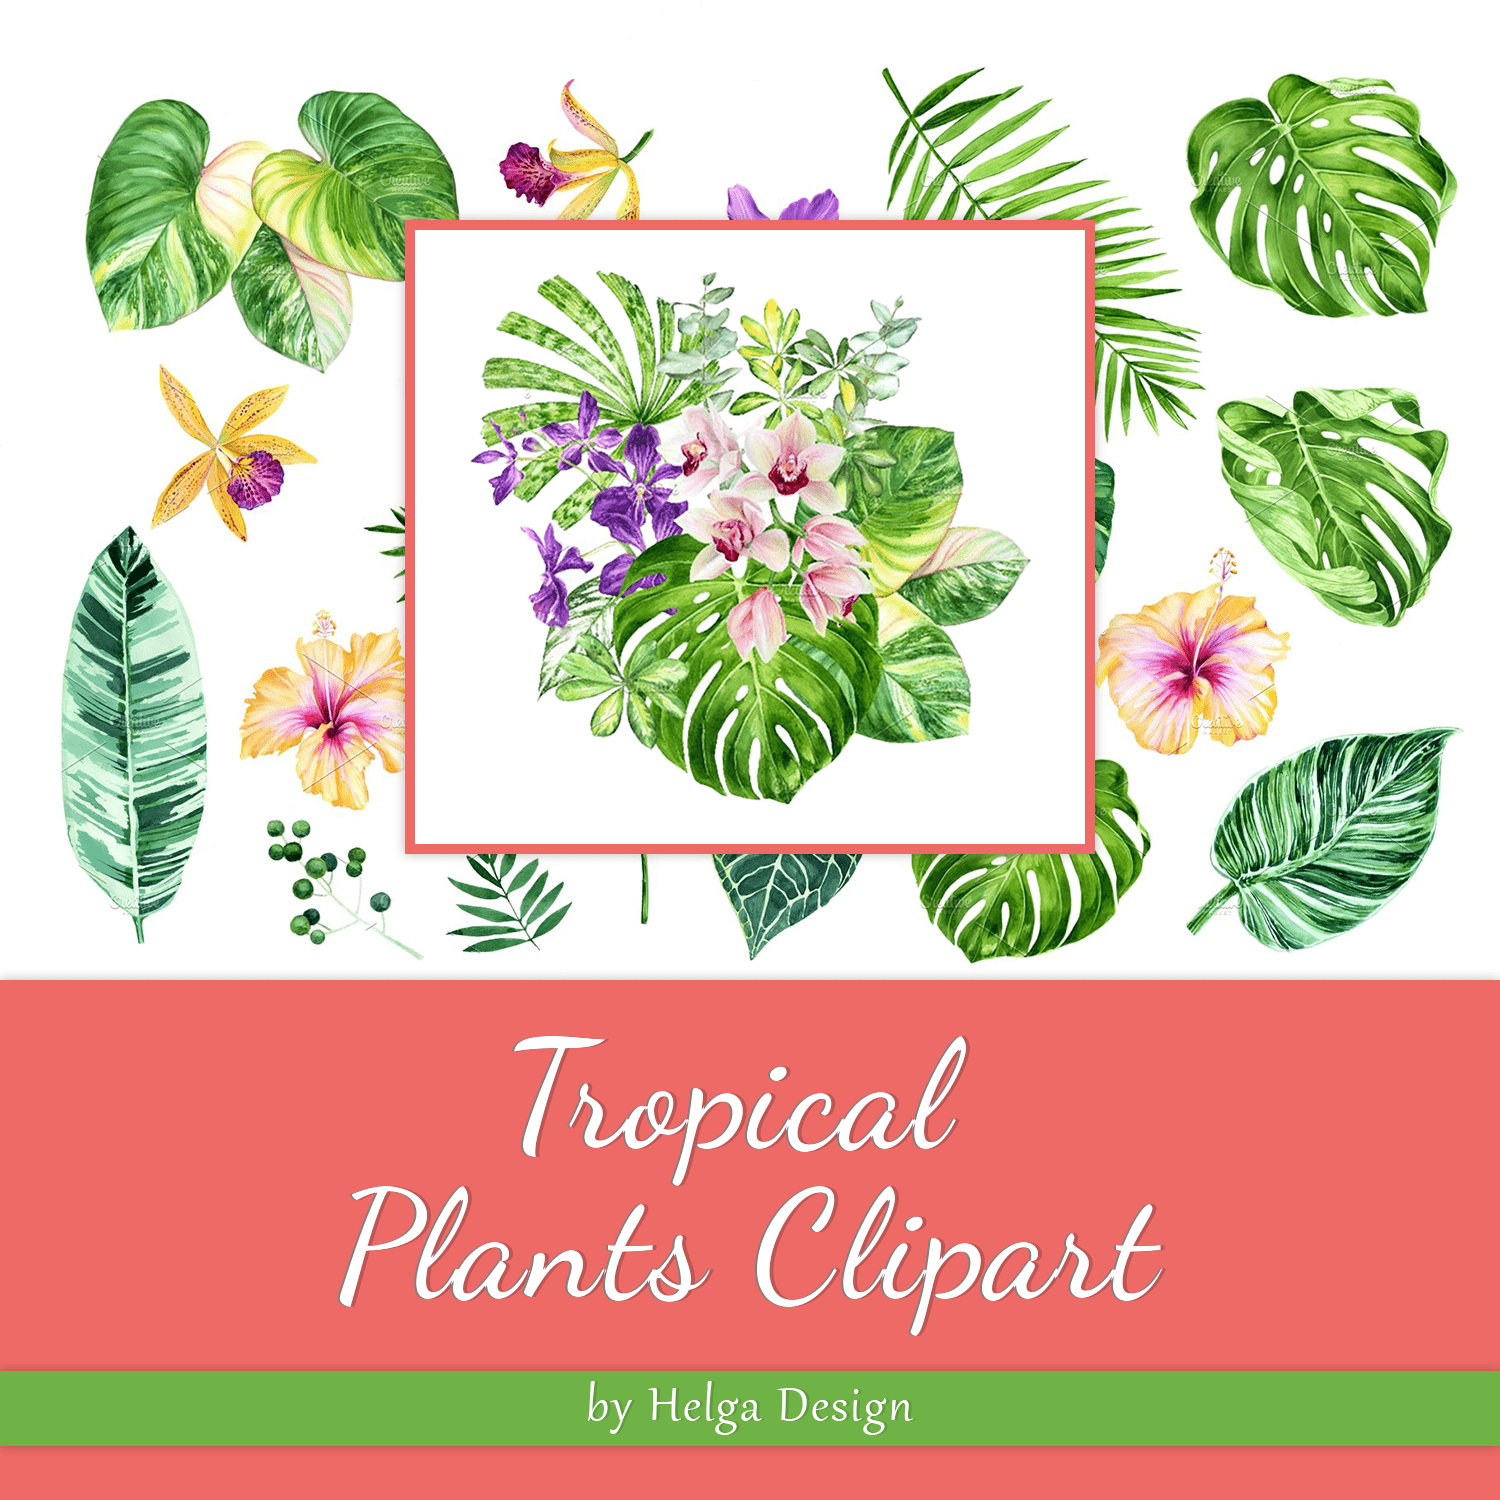 Tropical Plants Clipart cover.